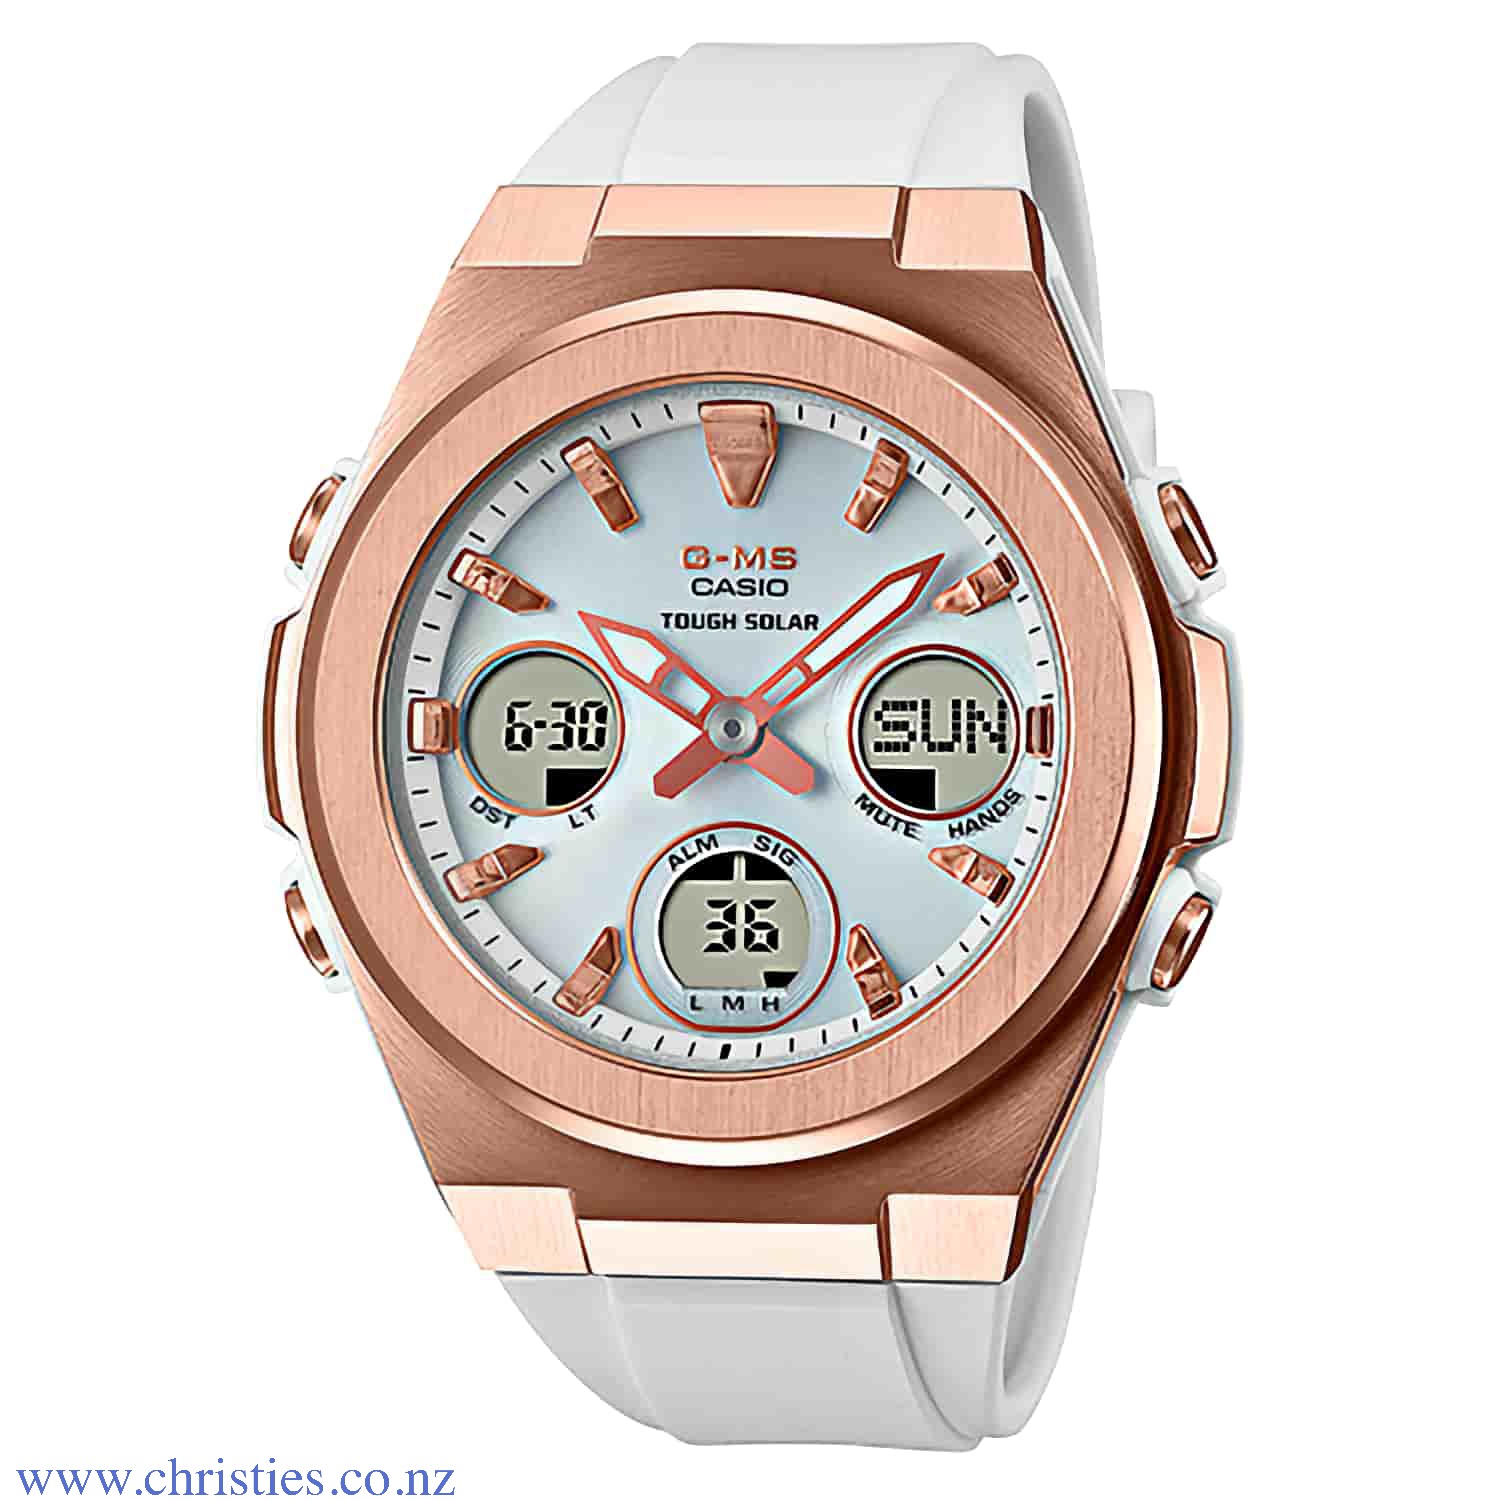 MSGS600G-7A Casio BabY-G G-MS Solar Rose Watches. The three digital displays of these models combine with analog timekeeping to create a sporty yet elegant look. These watches feature elegant metal cases and resin bands available in black or white for per